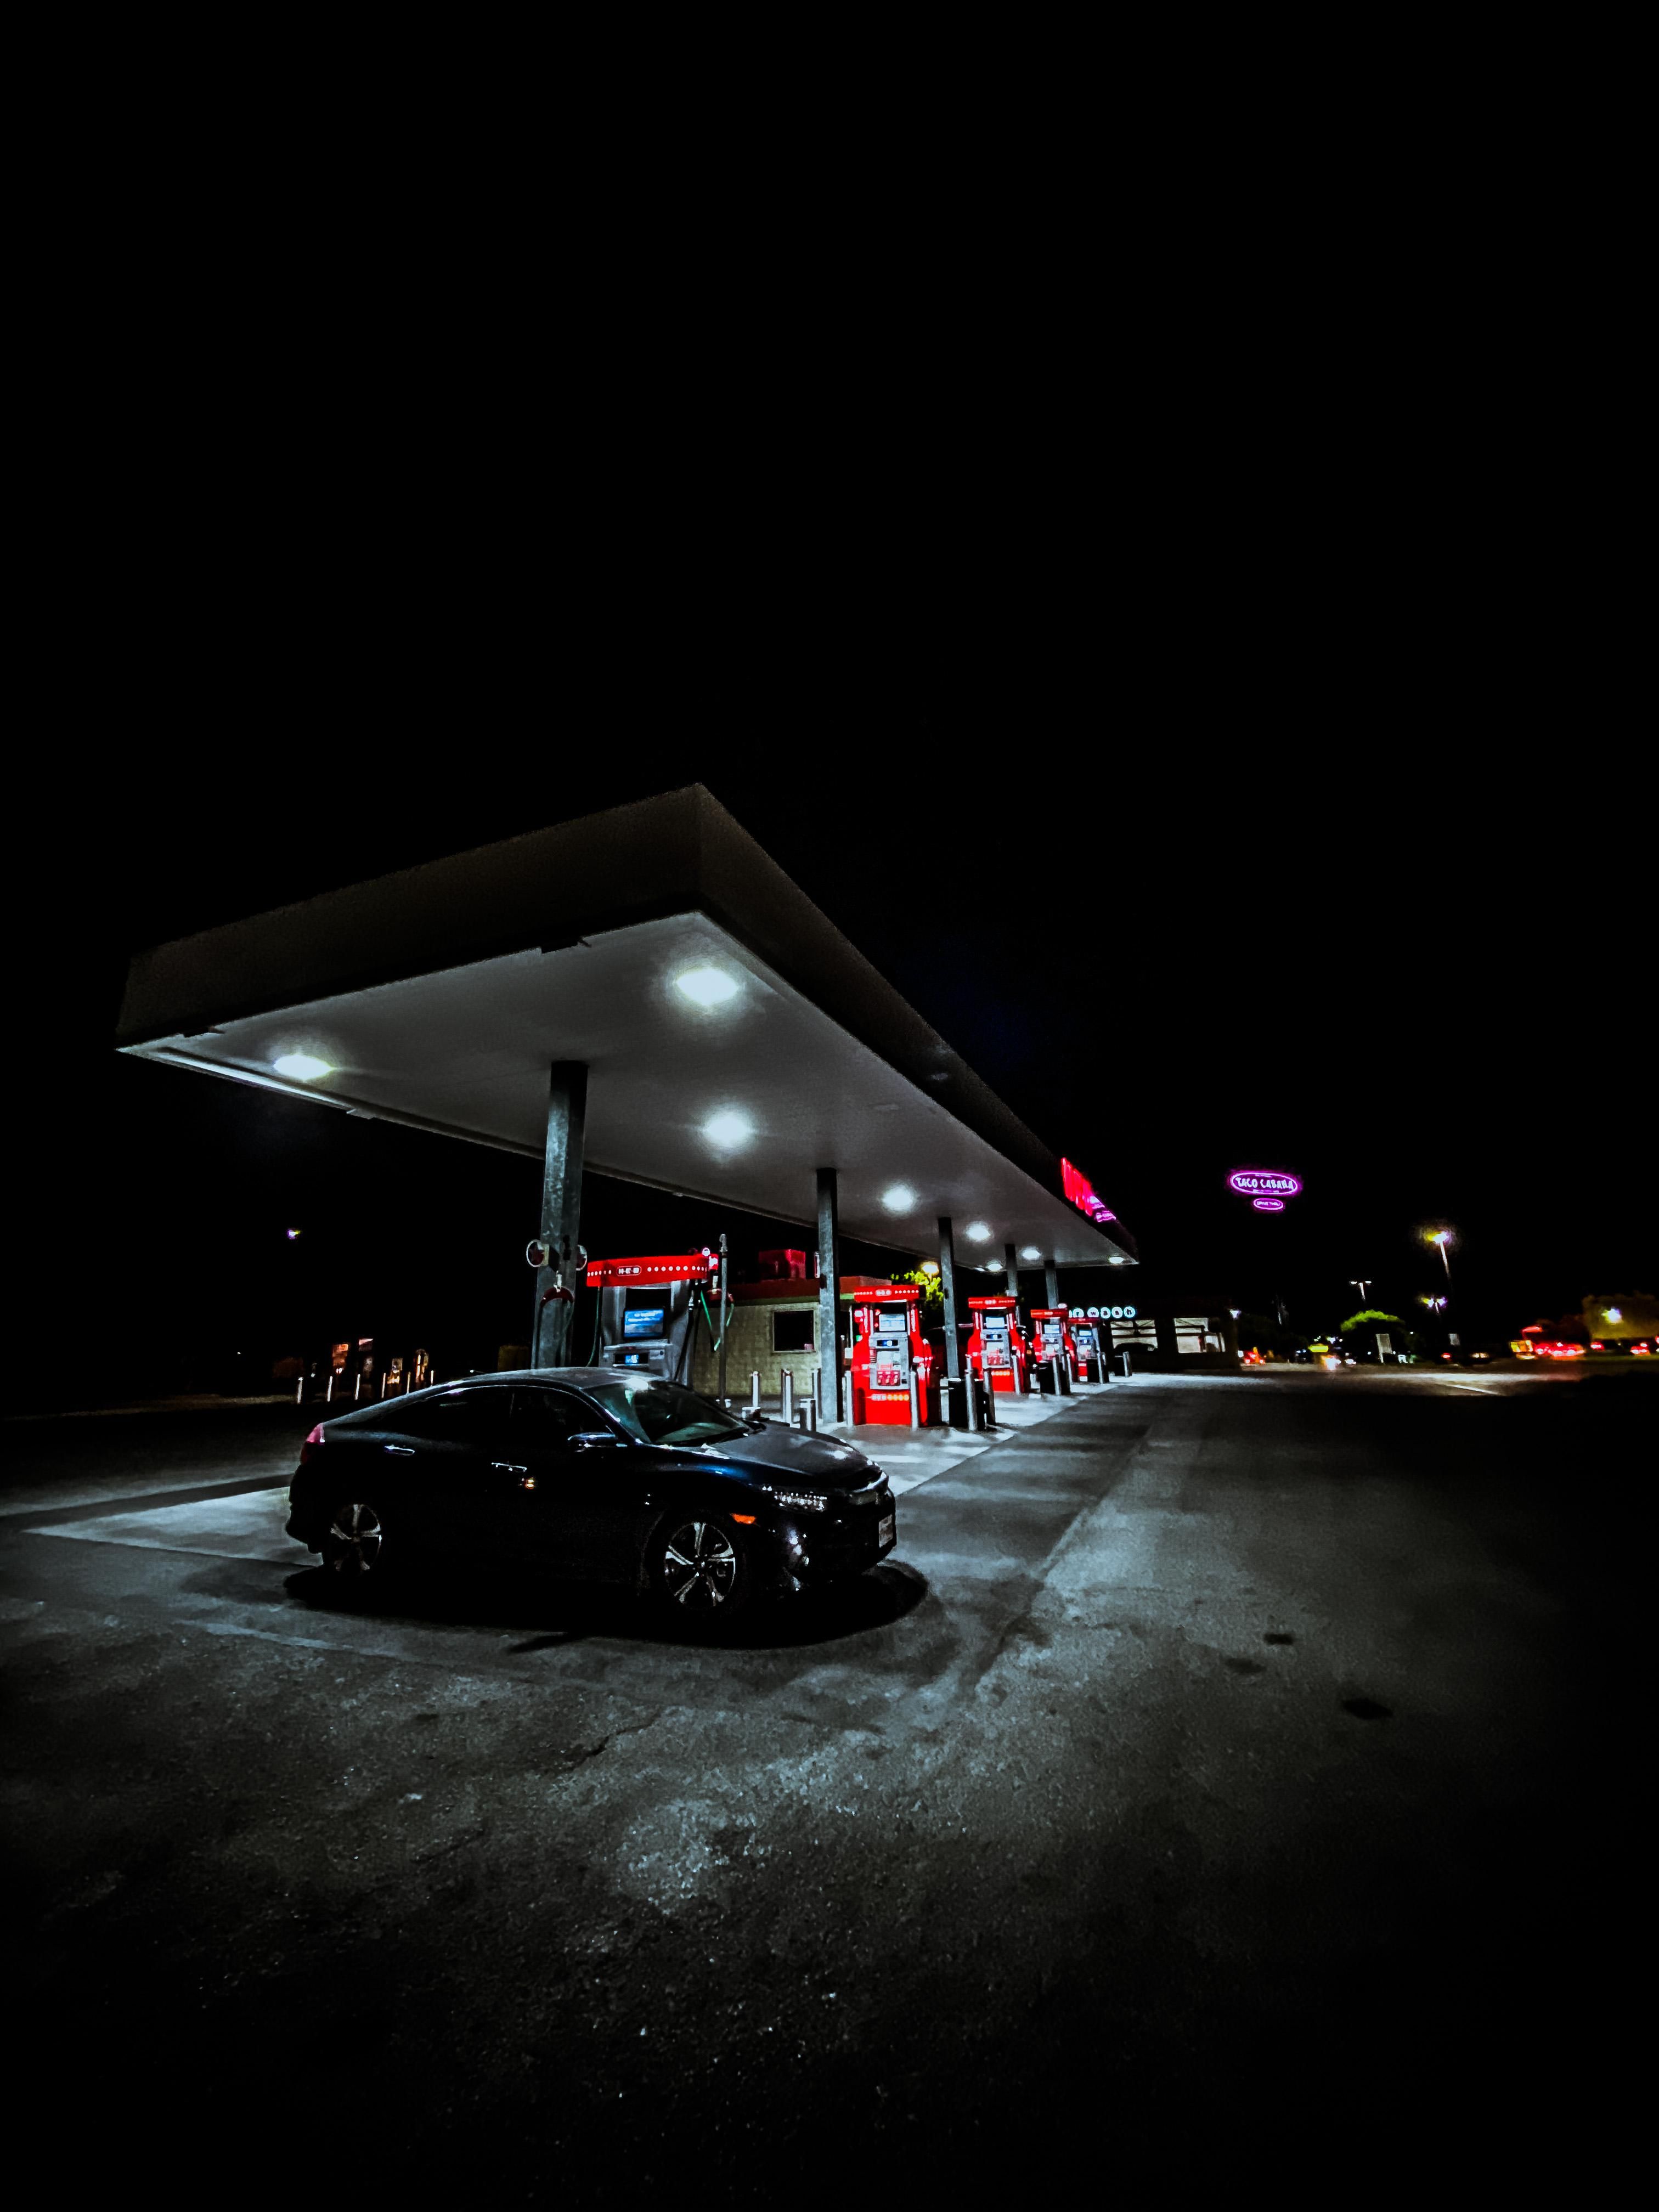 ITAP of a gas station at night#PHOTO #CAPTURE #NATURE #INCREDIBLE. Gas station, Picture of gases, Night photo